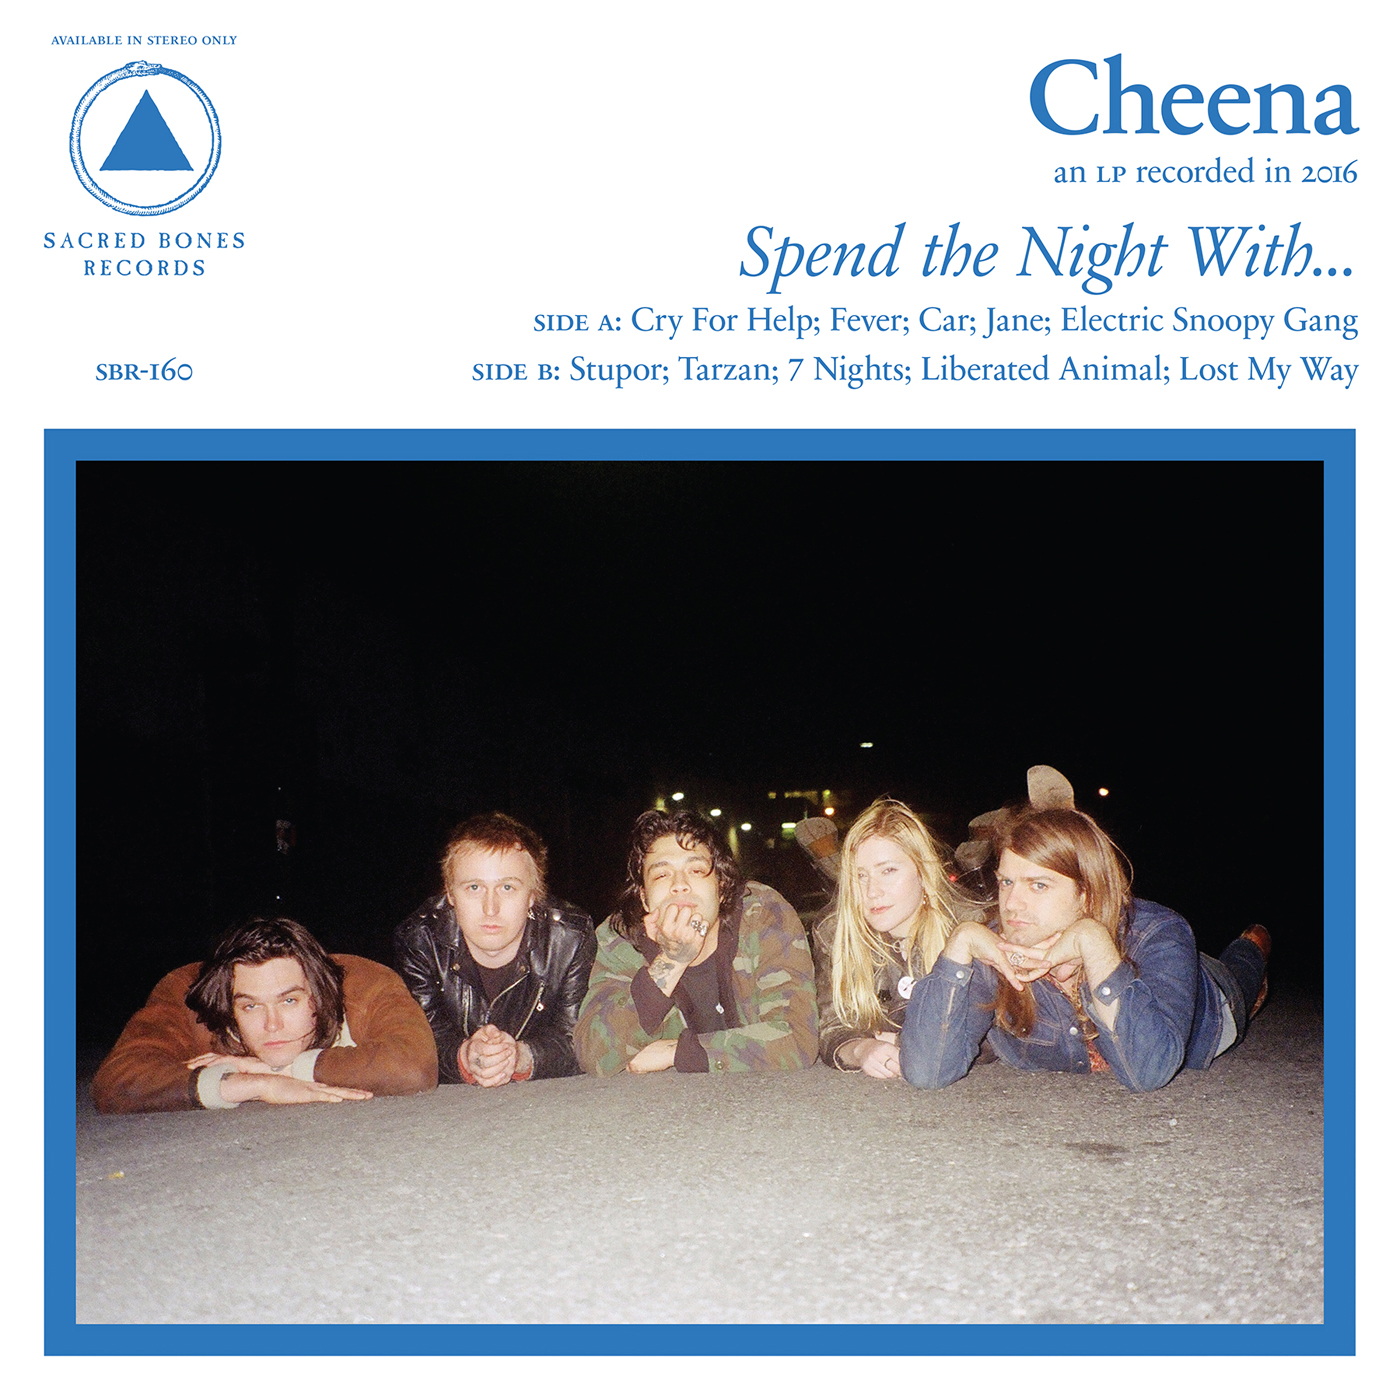 Cheena - Spend the Night with...